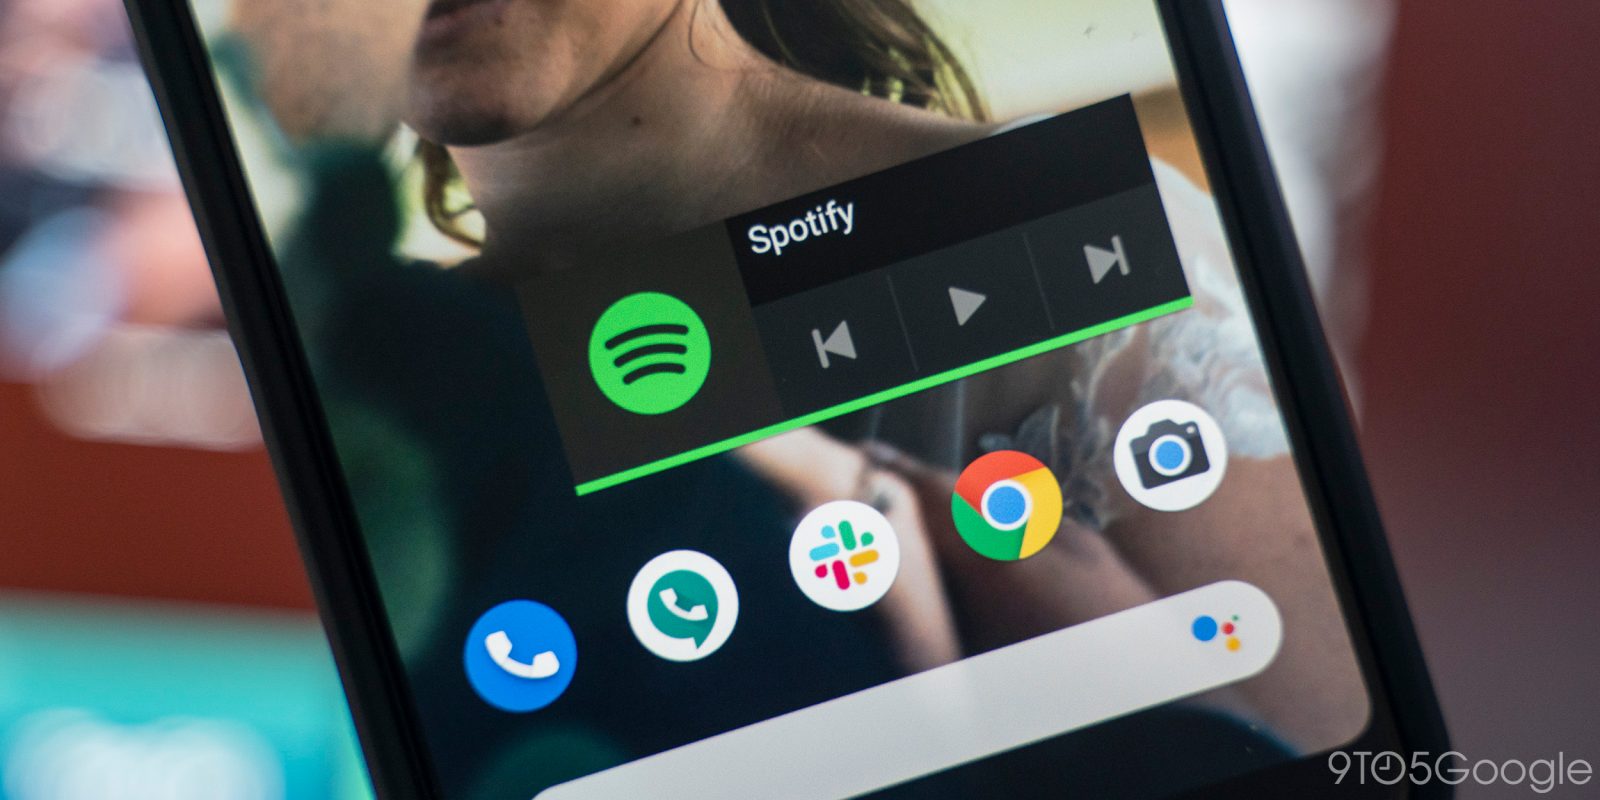 How To Replace Spotify S Homescreen Widget On Android 9to5google